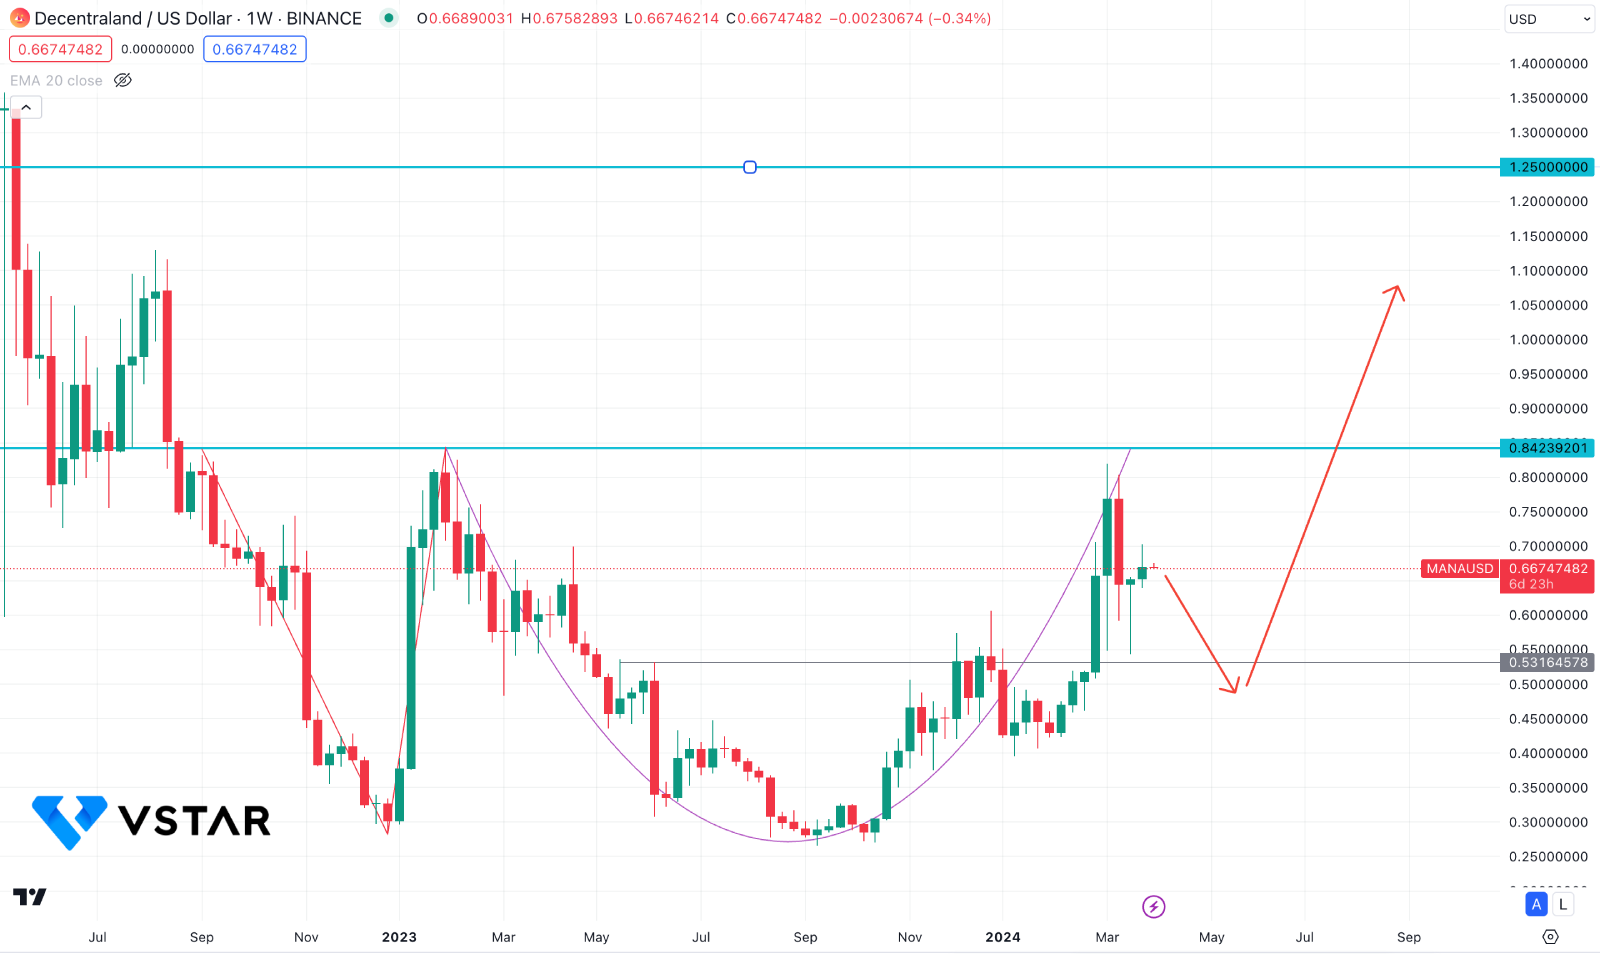 Decentraland (MANA) Price Could Soar From The "Adam & Eve" Breakout